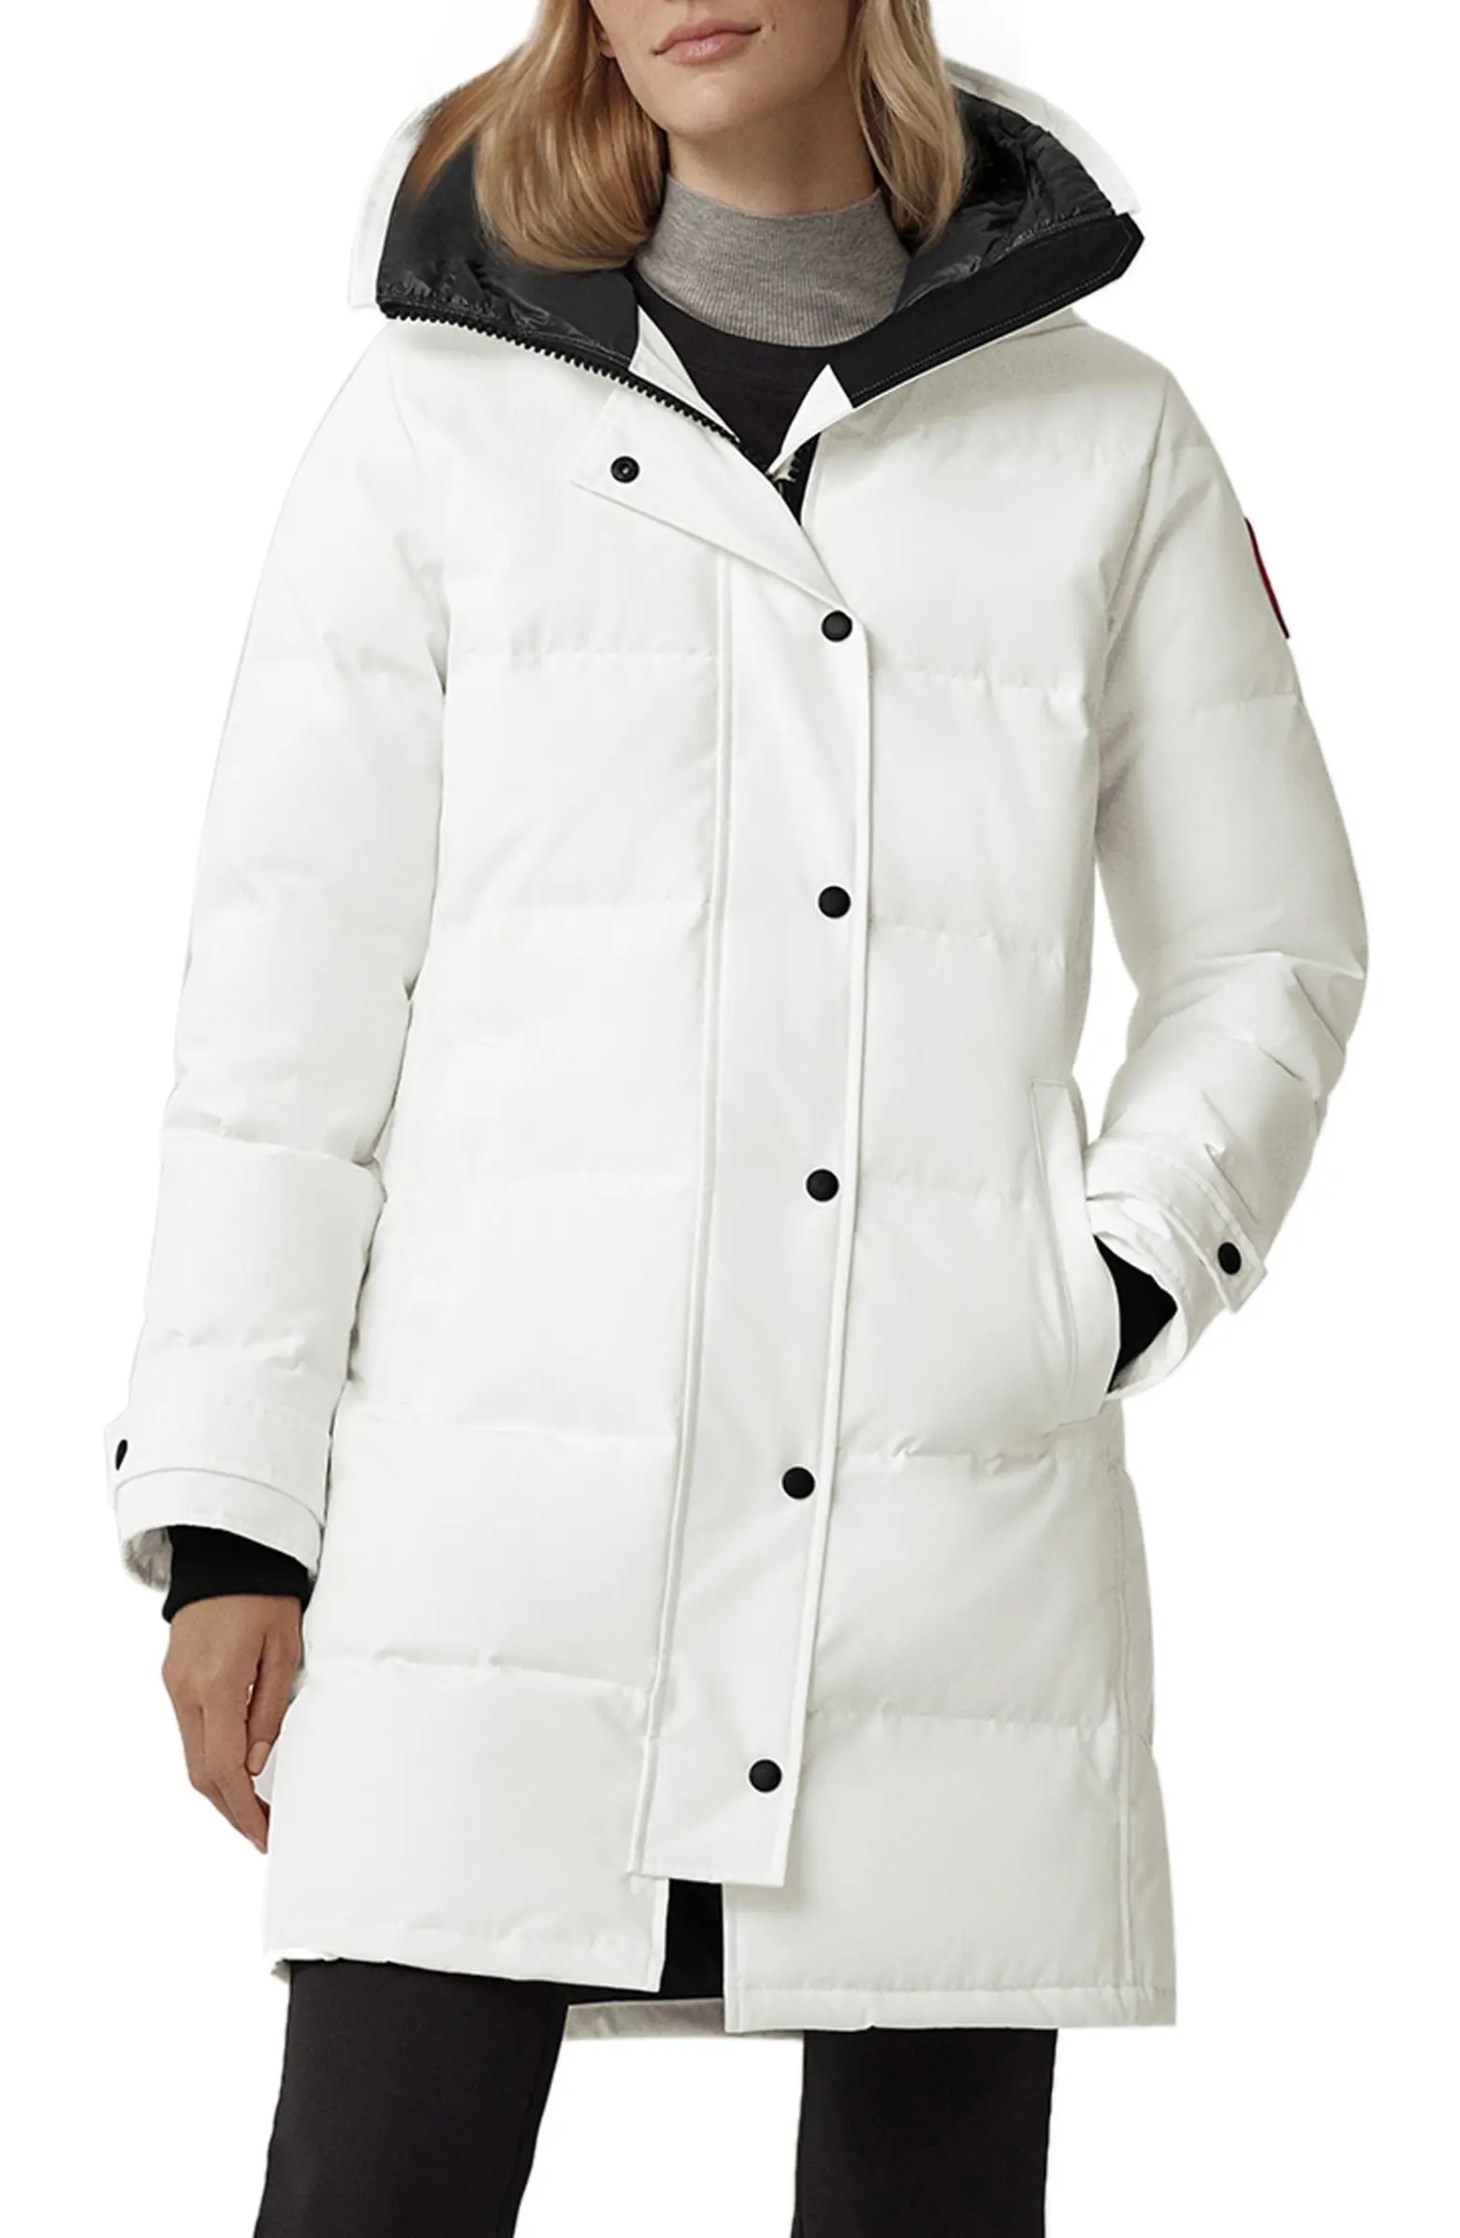 Canada Goose Shelburne Water Resistant Down Parka winter coat for extreme cold